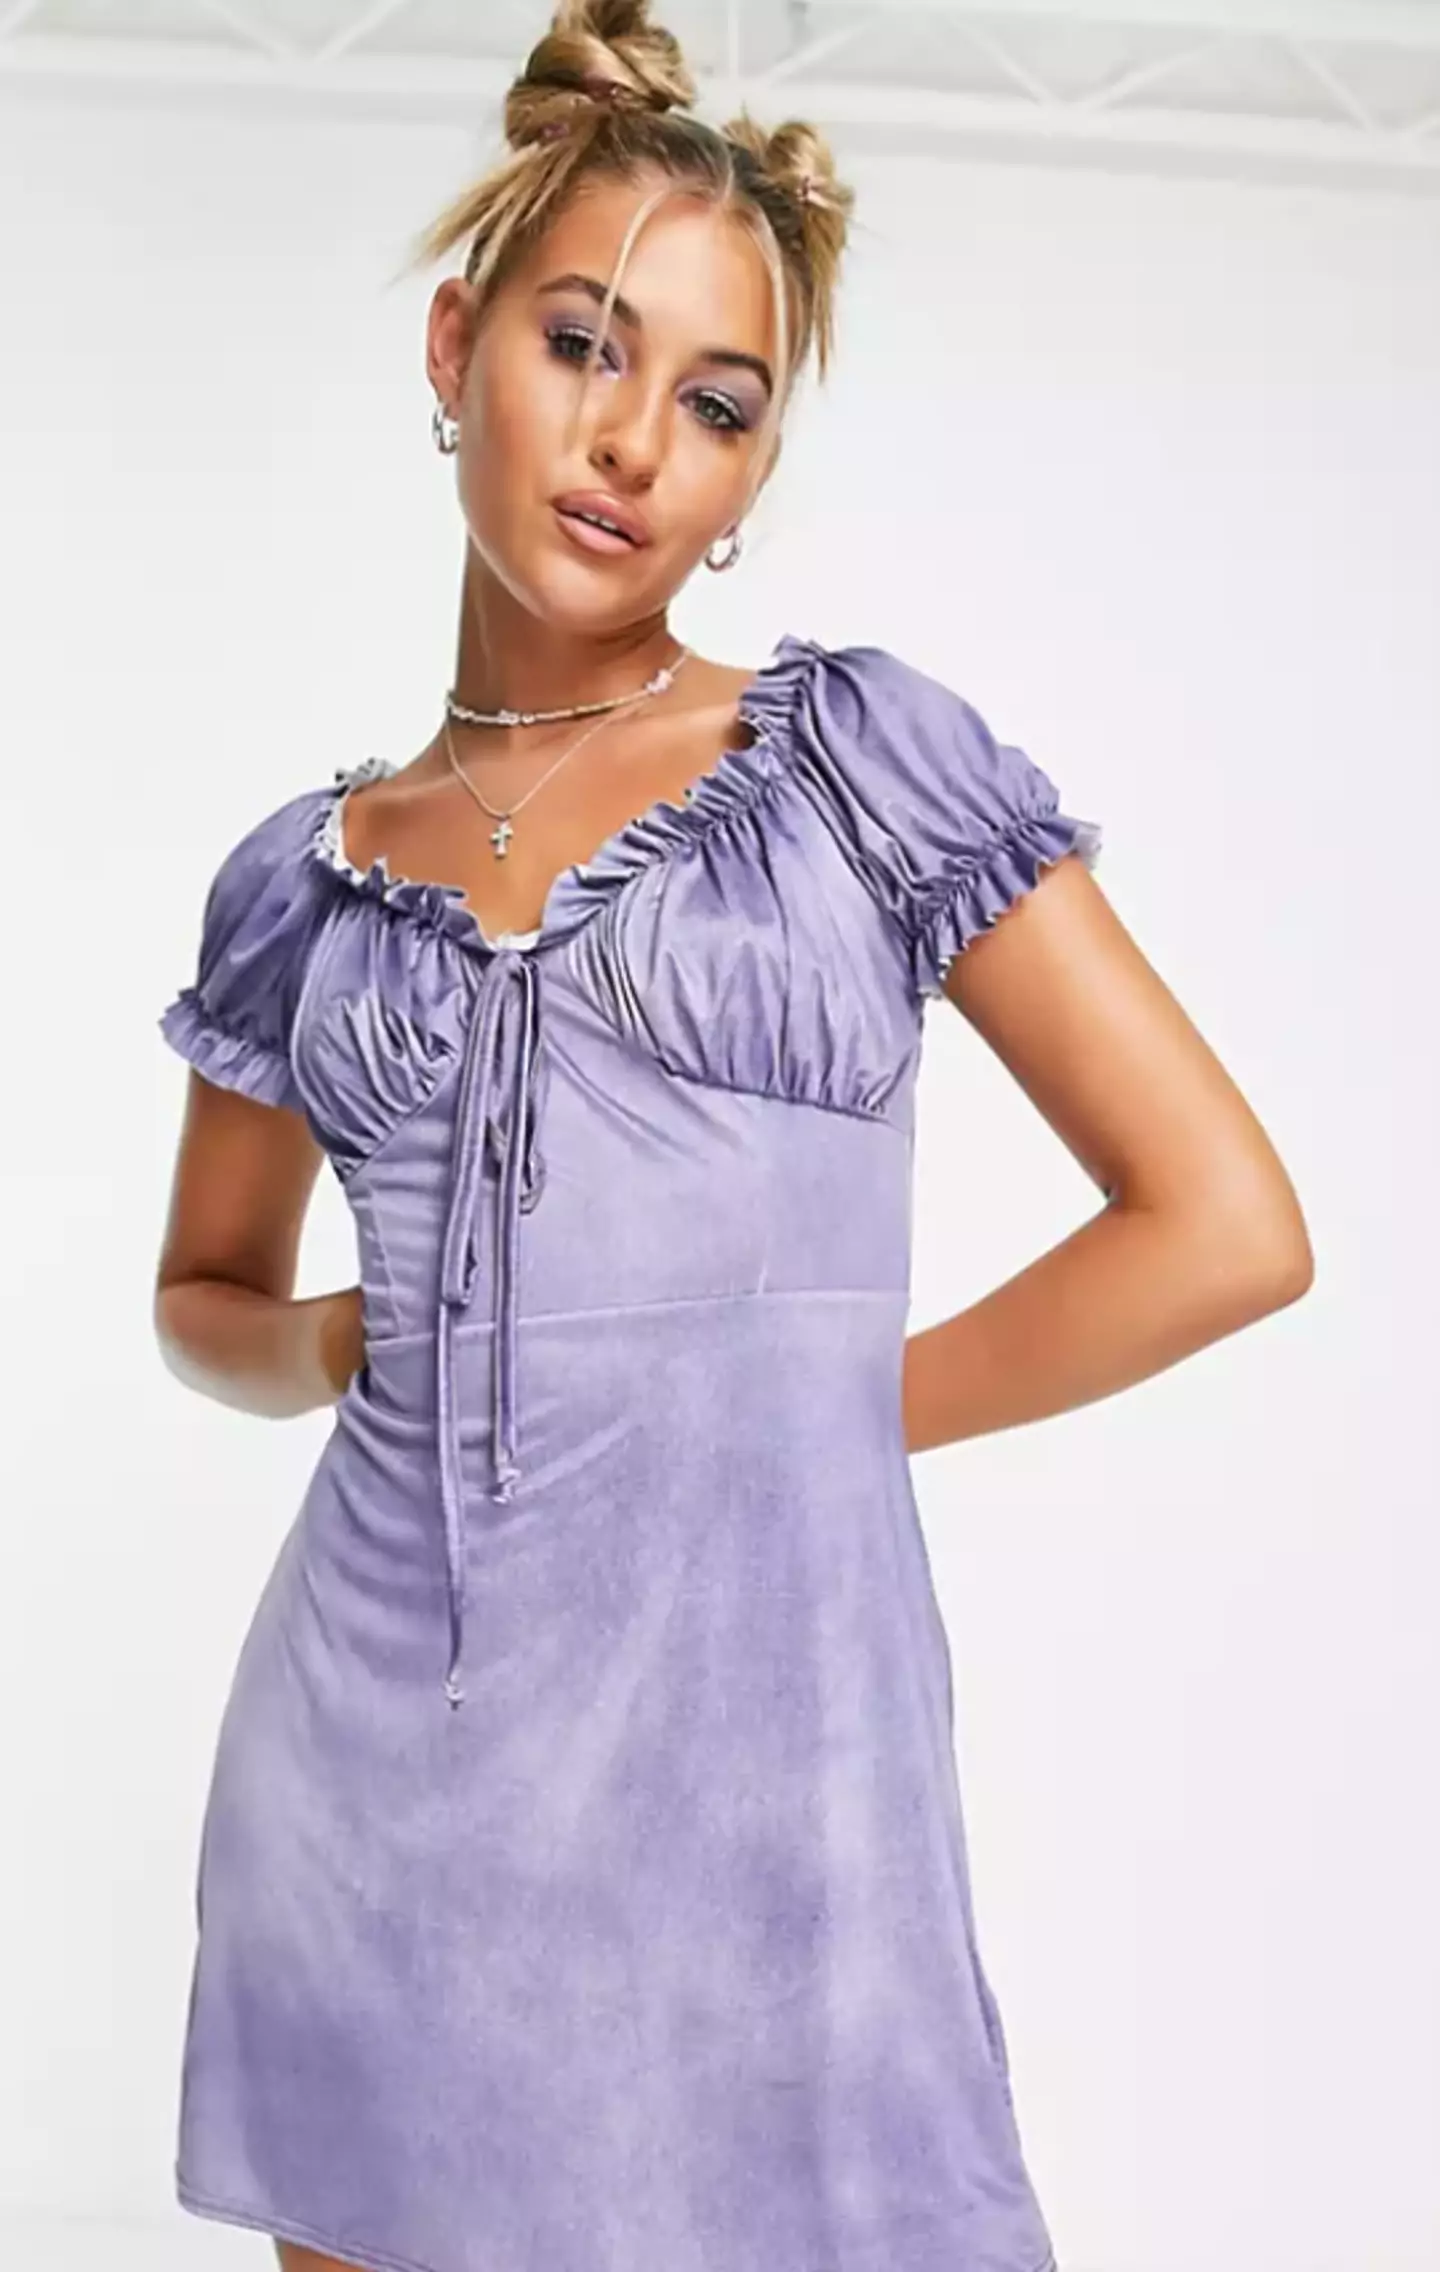 Is there anything more nostalgic than a babydoll dress? (